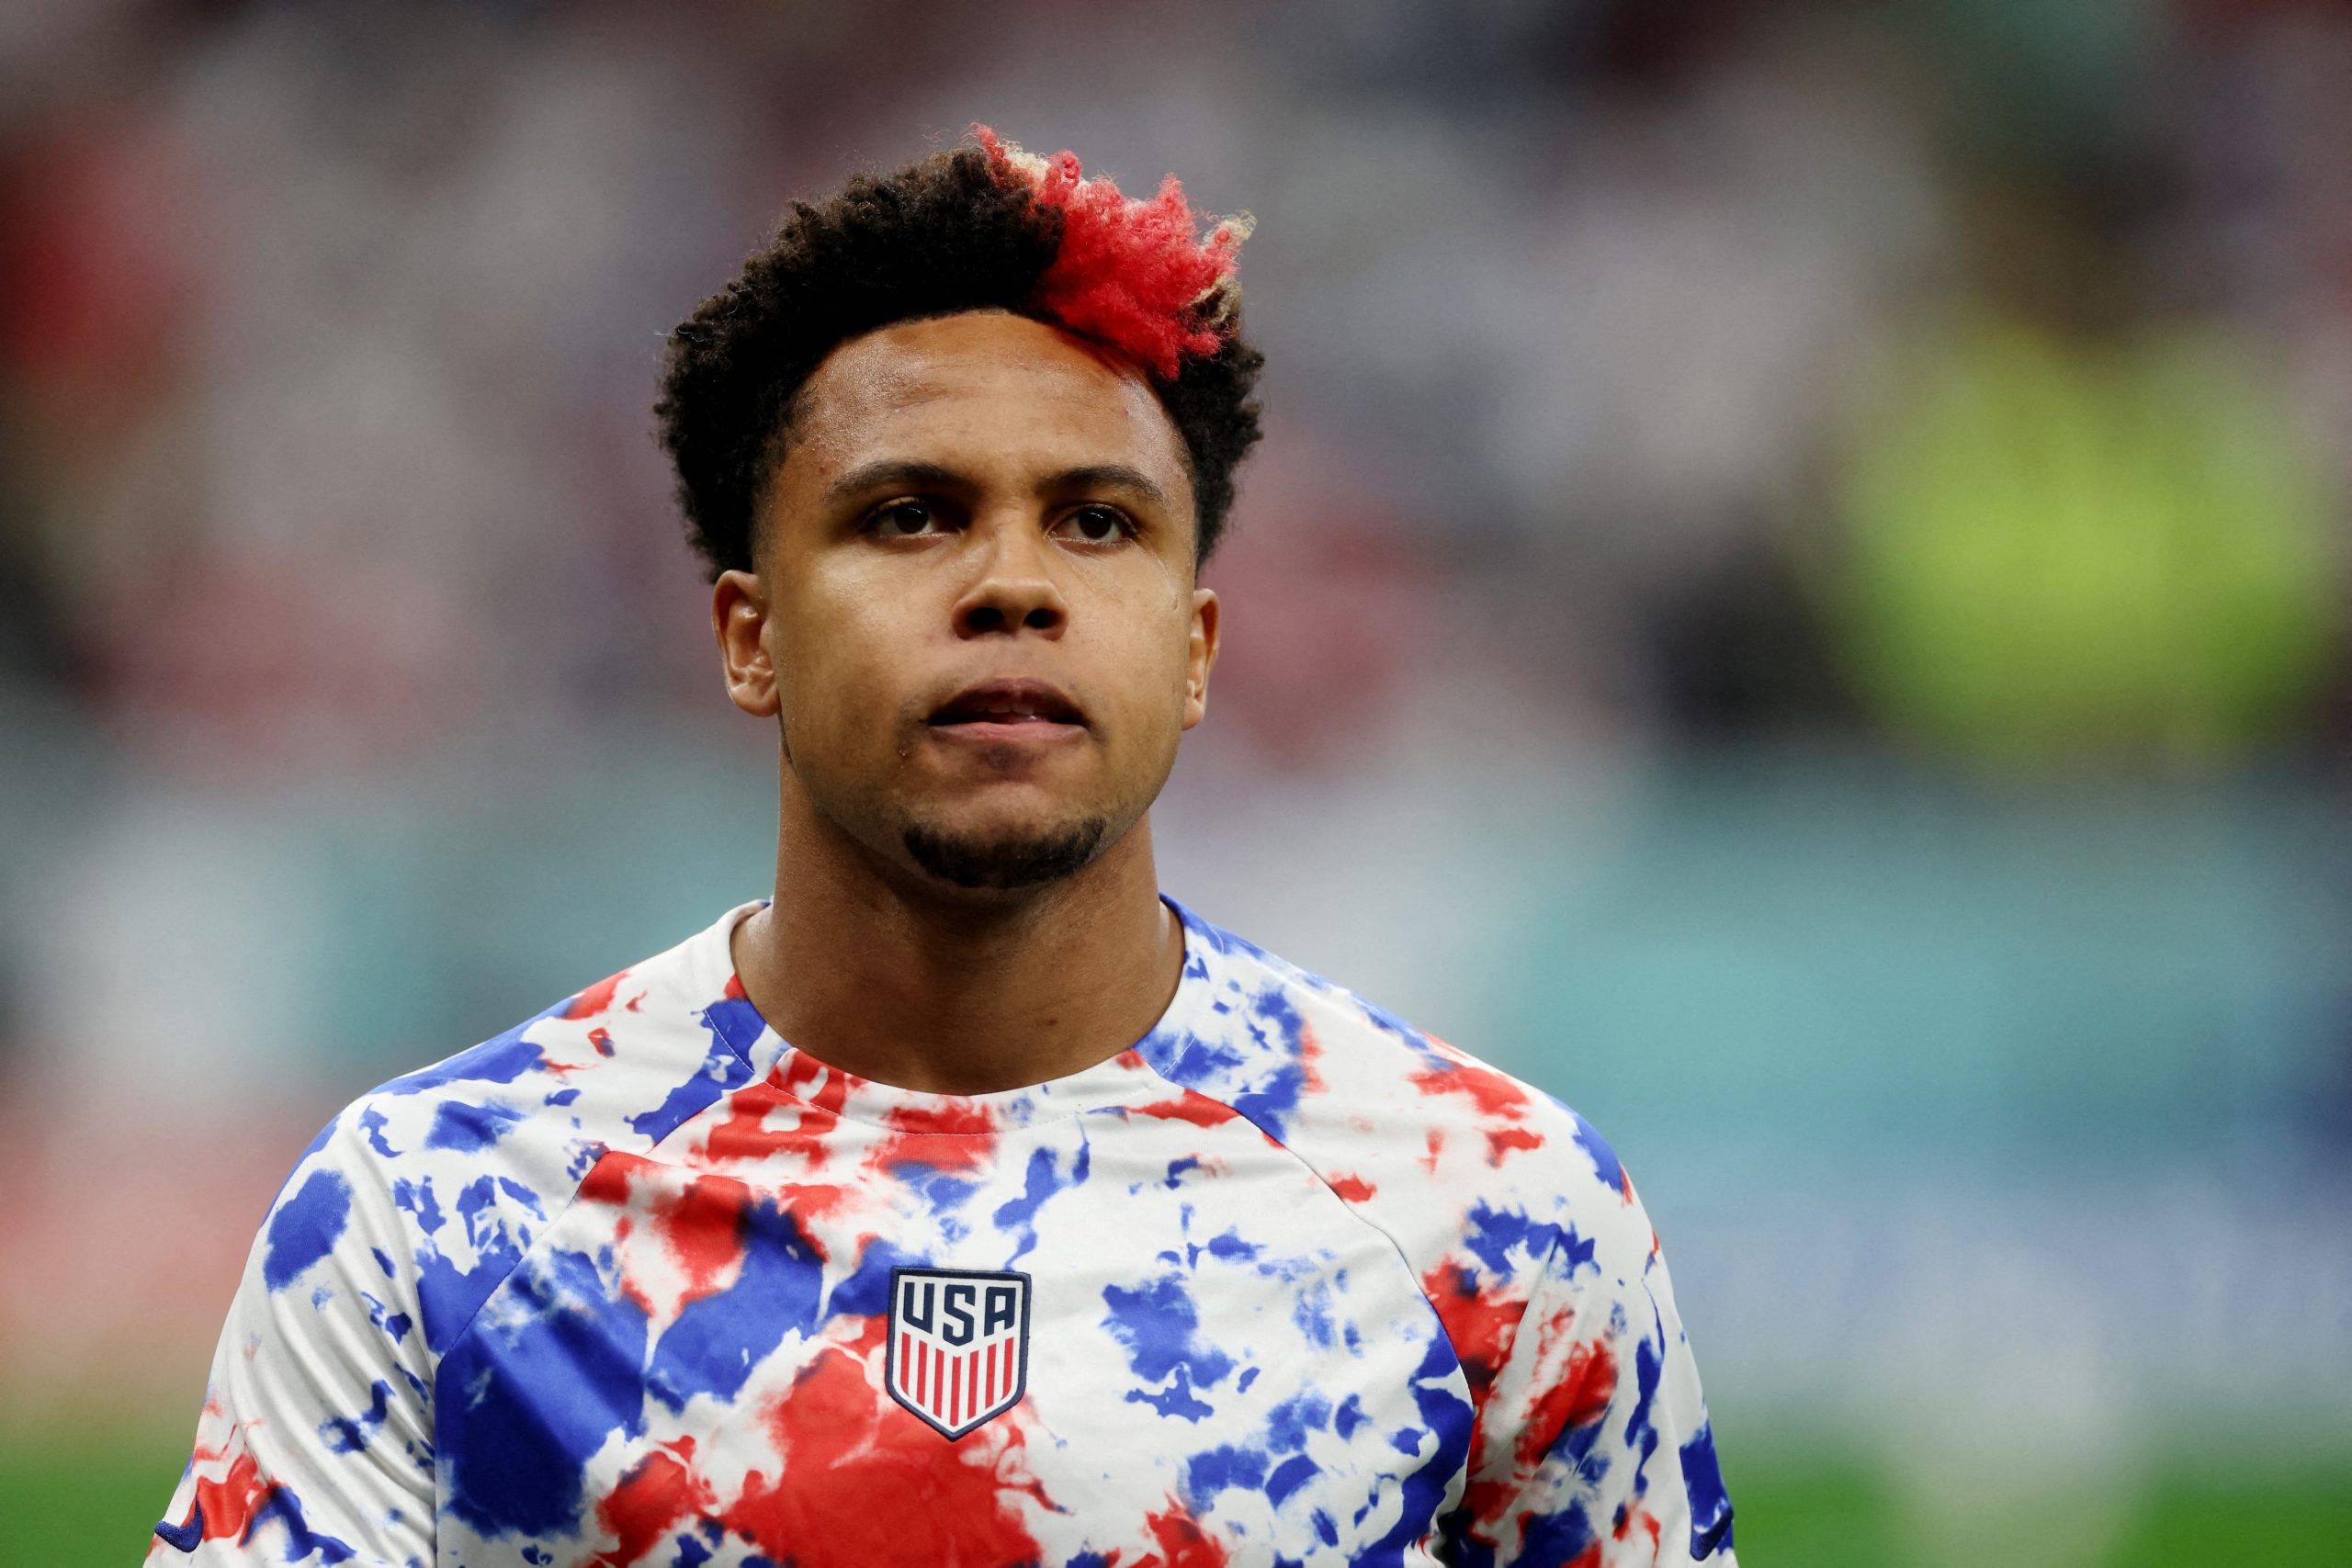 Kevin Campbell warns Tottenham not to sign Weston McKennie - Premier League News